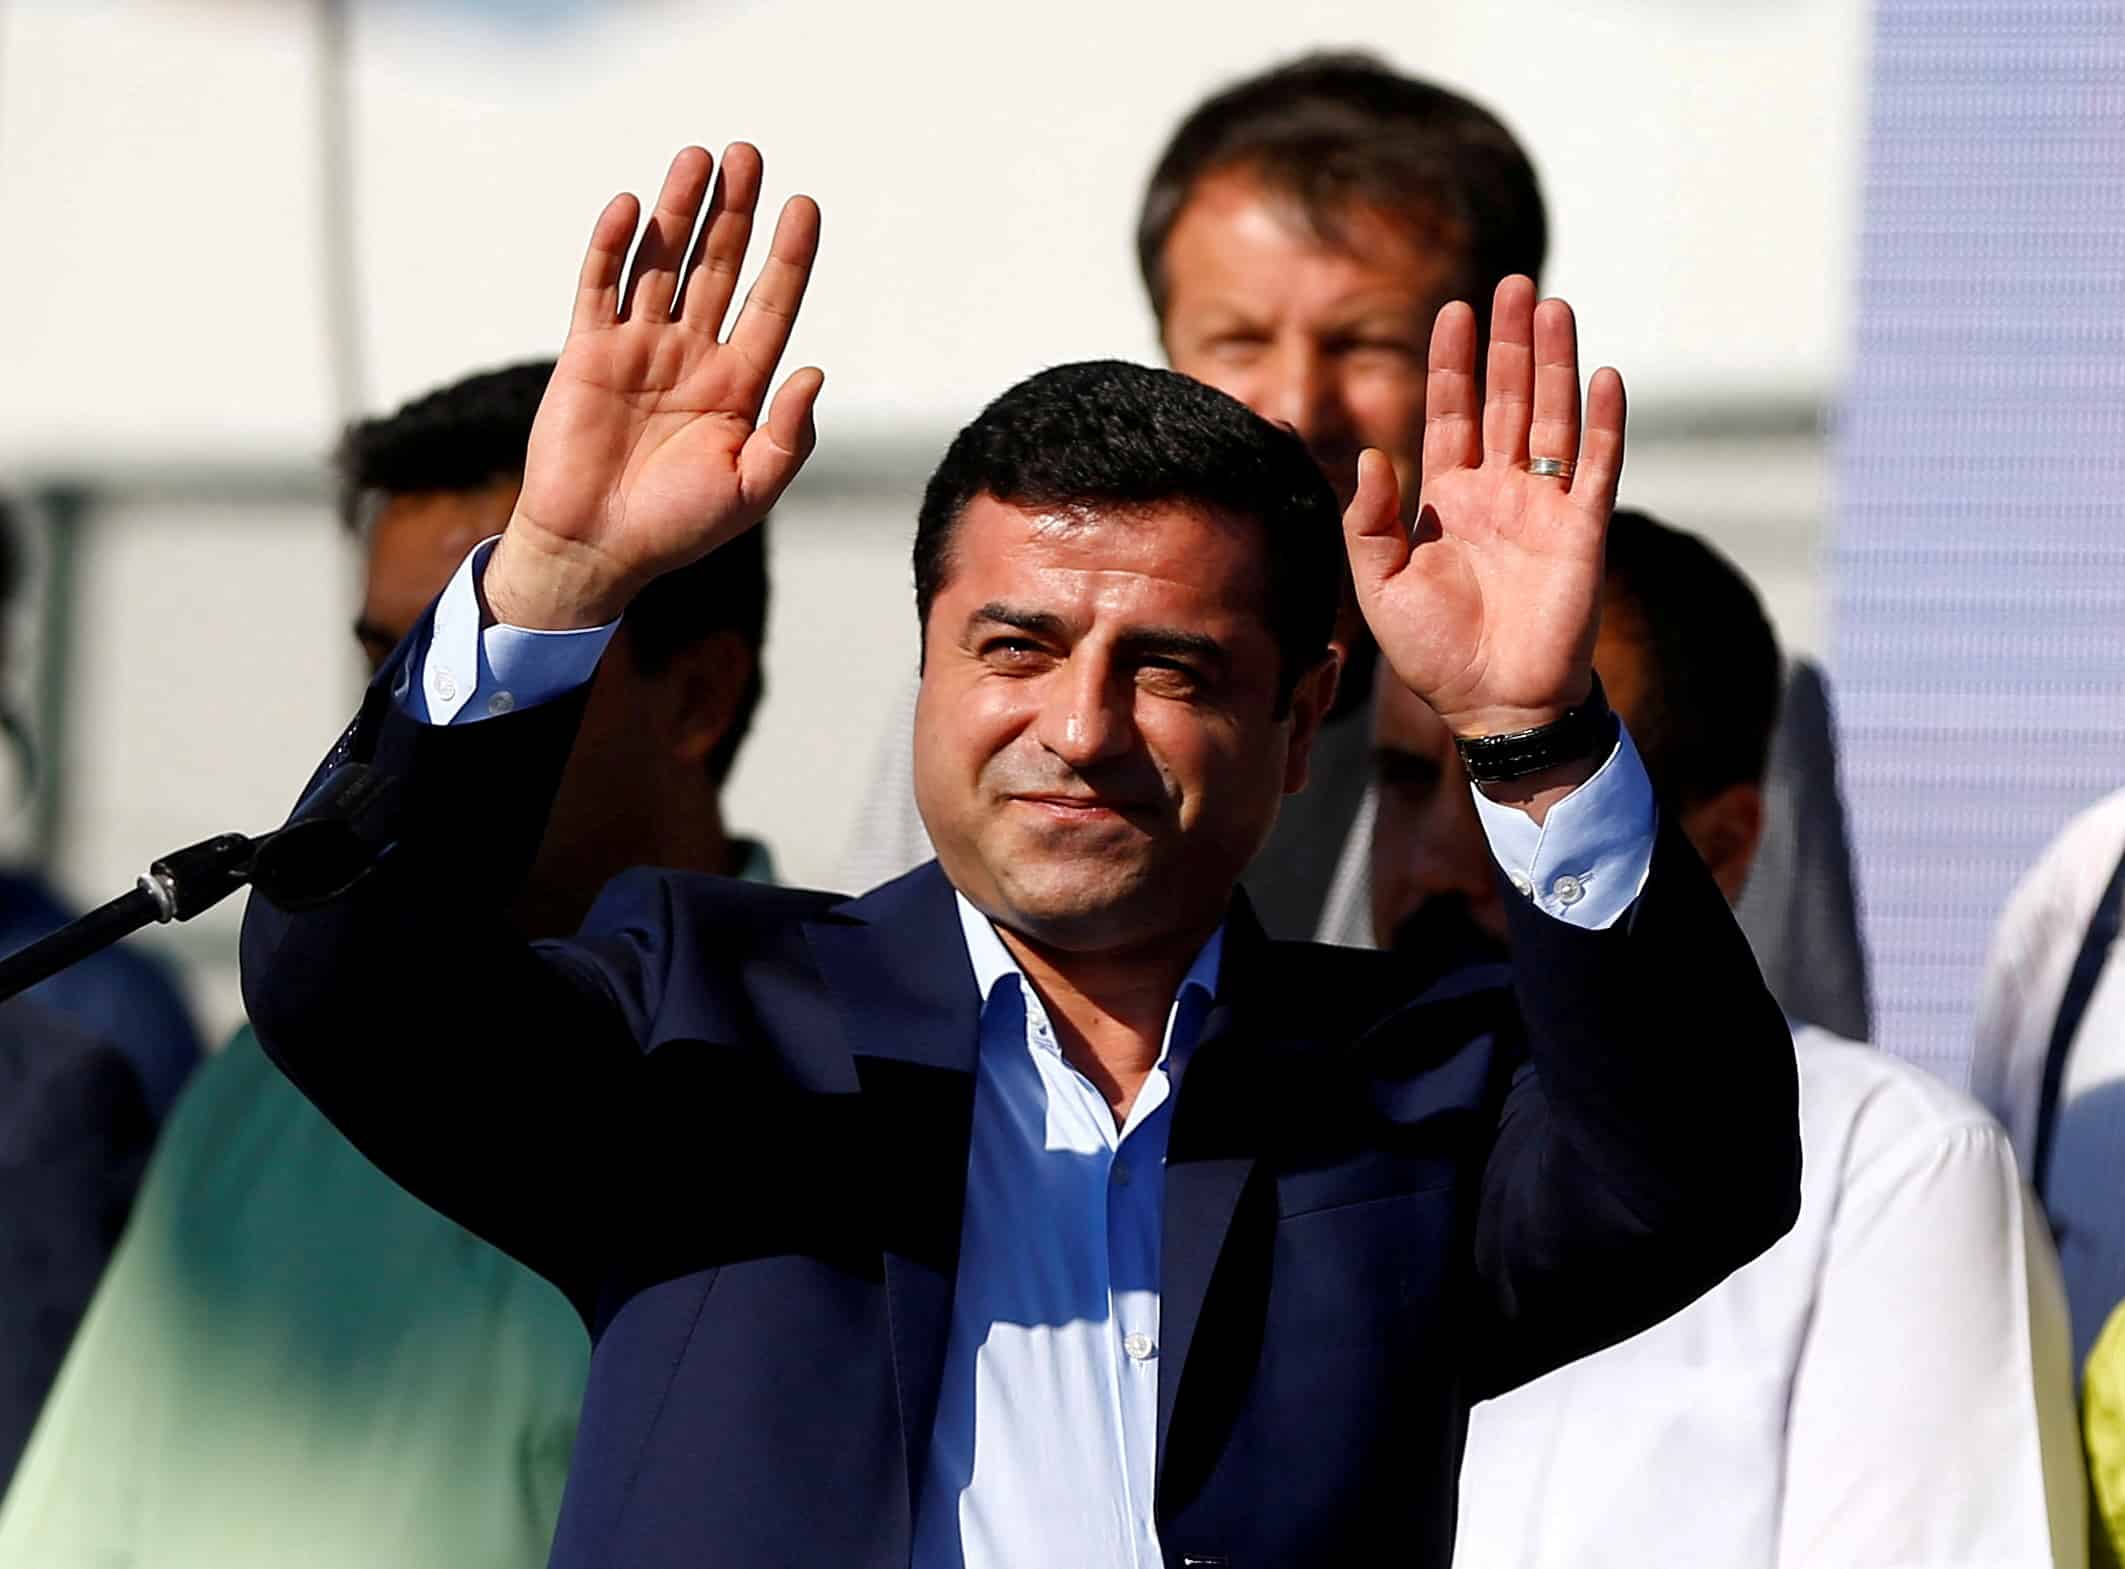 image Turkey convicts former pro-Kurdish party officials over 2014 Kobani protests